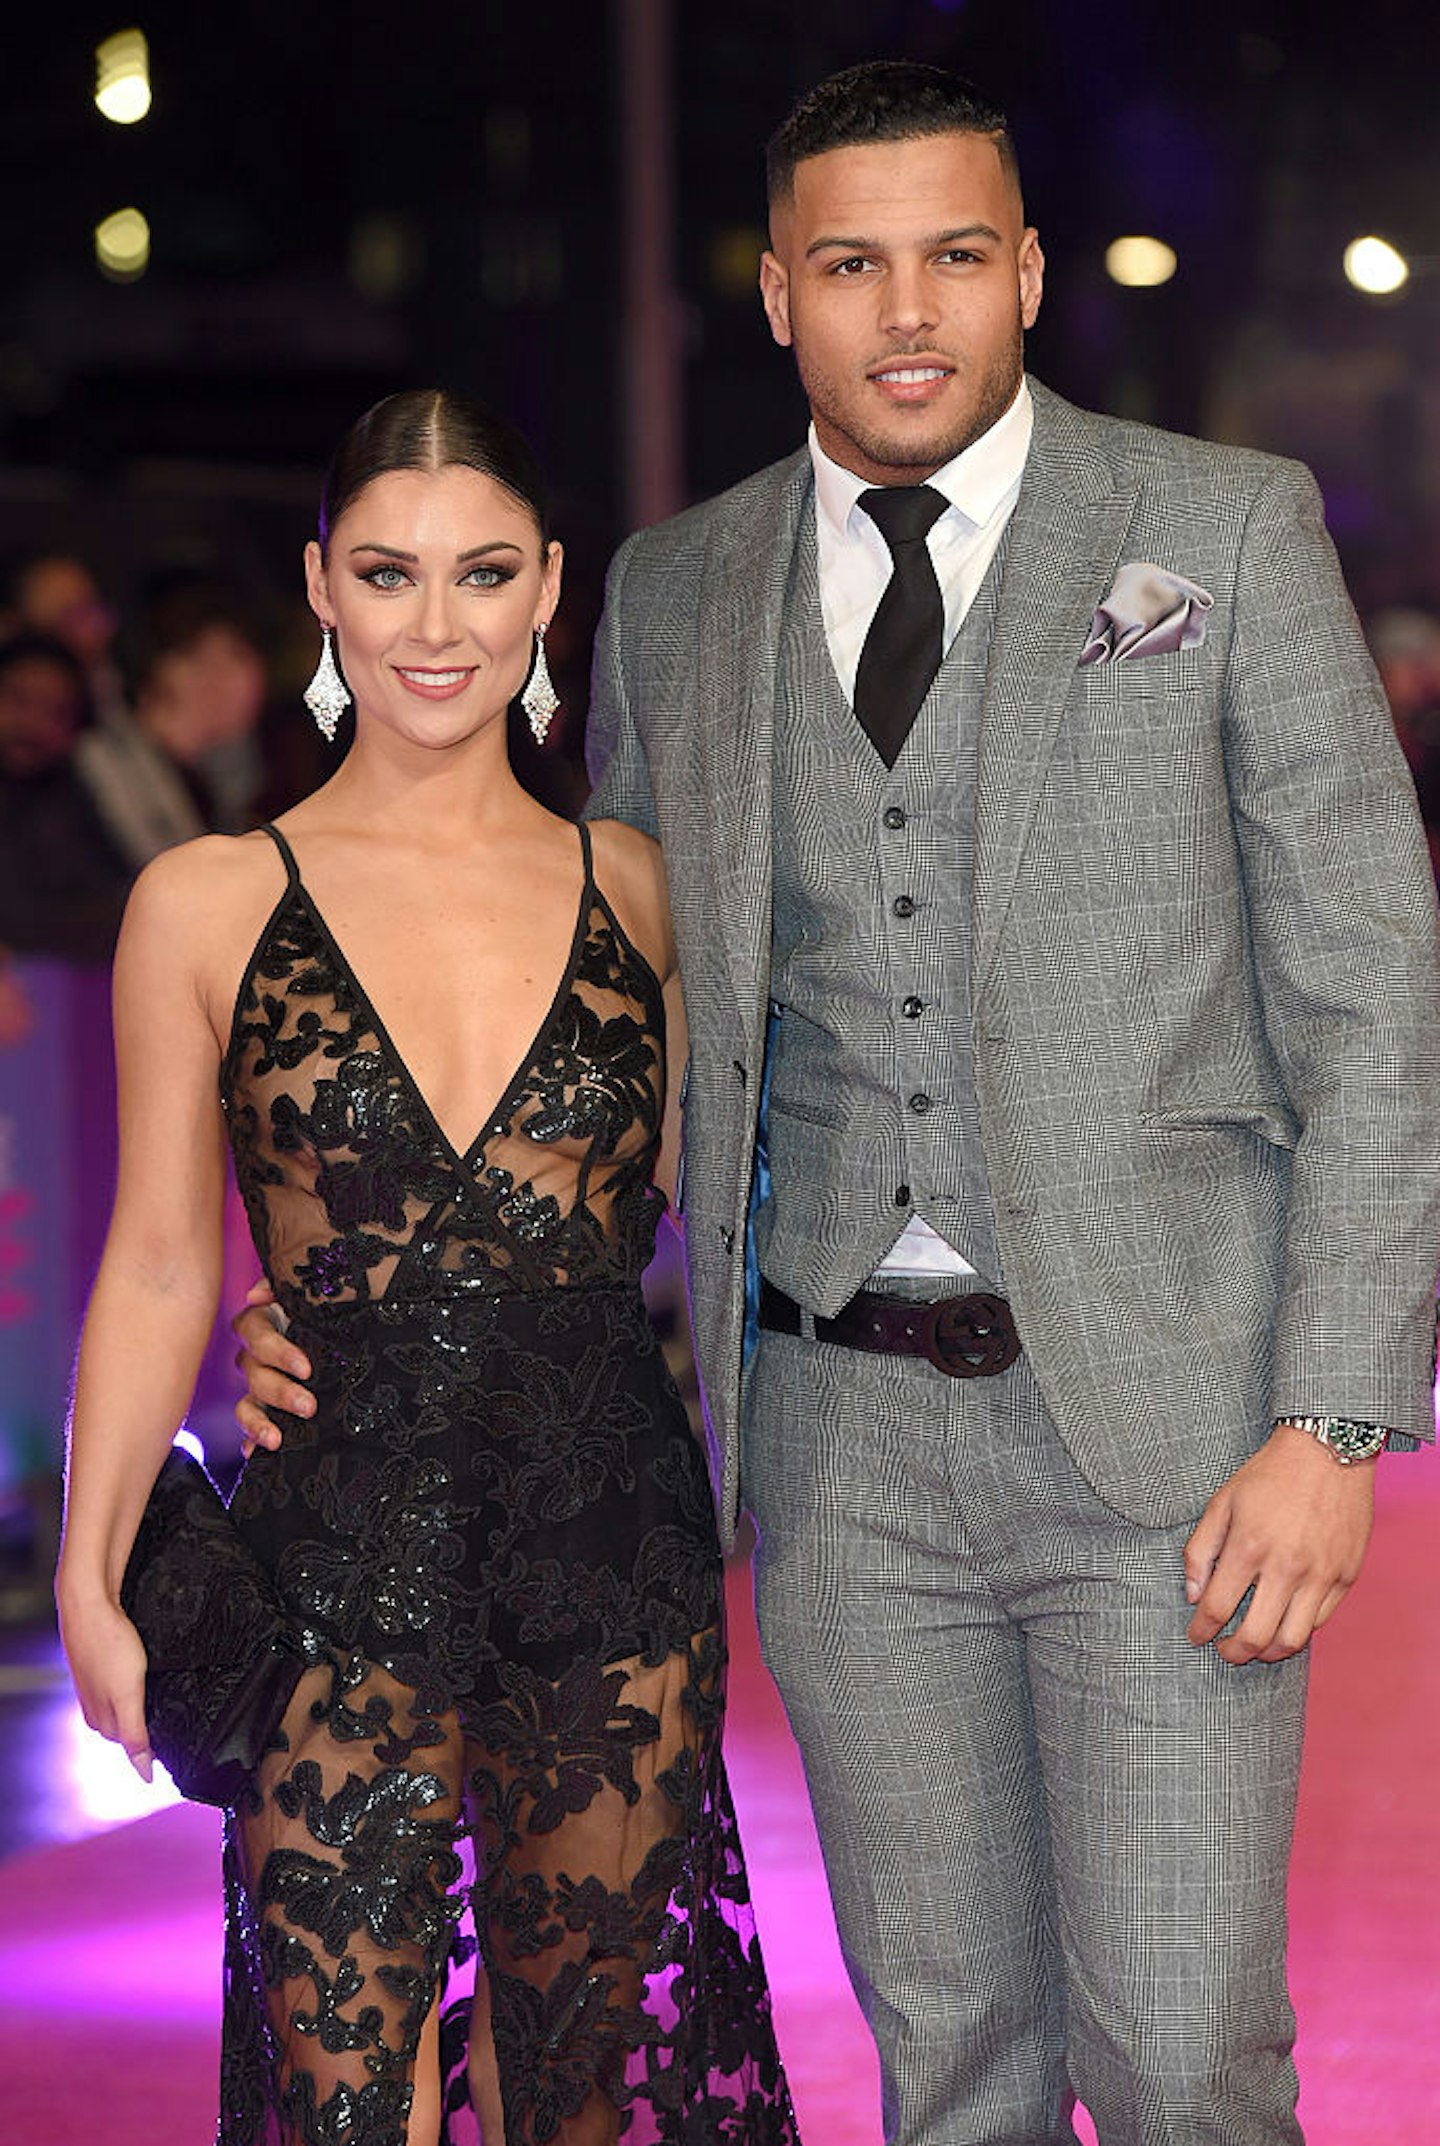 Luis Morrison and Cally Jane Beech